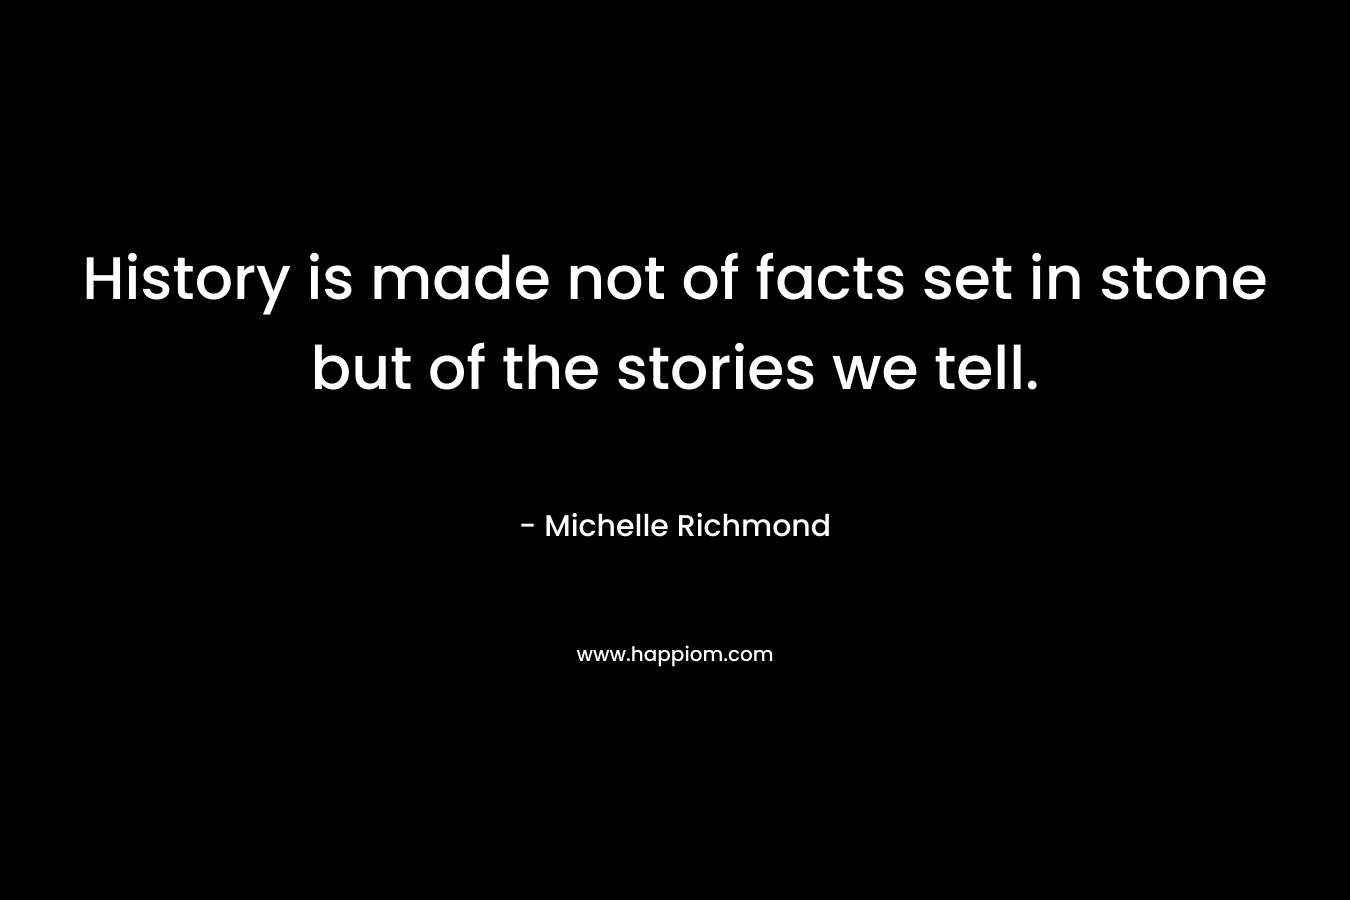 History is made not of facts set in stone but of the stories we tell. – Michelle Richmond